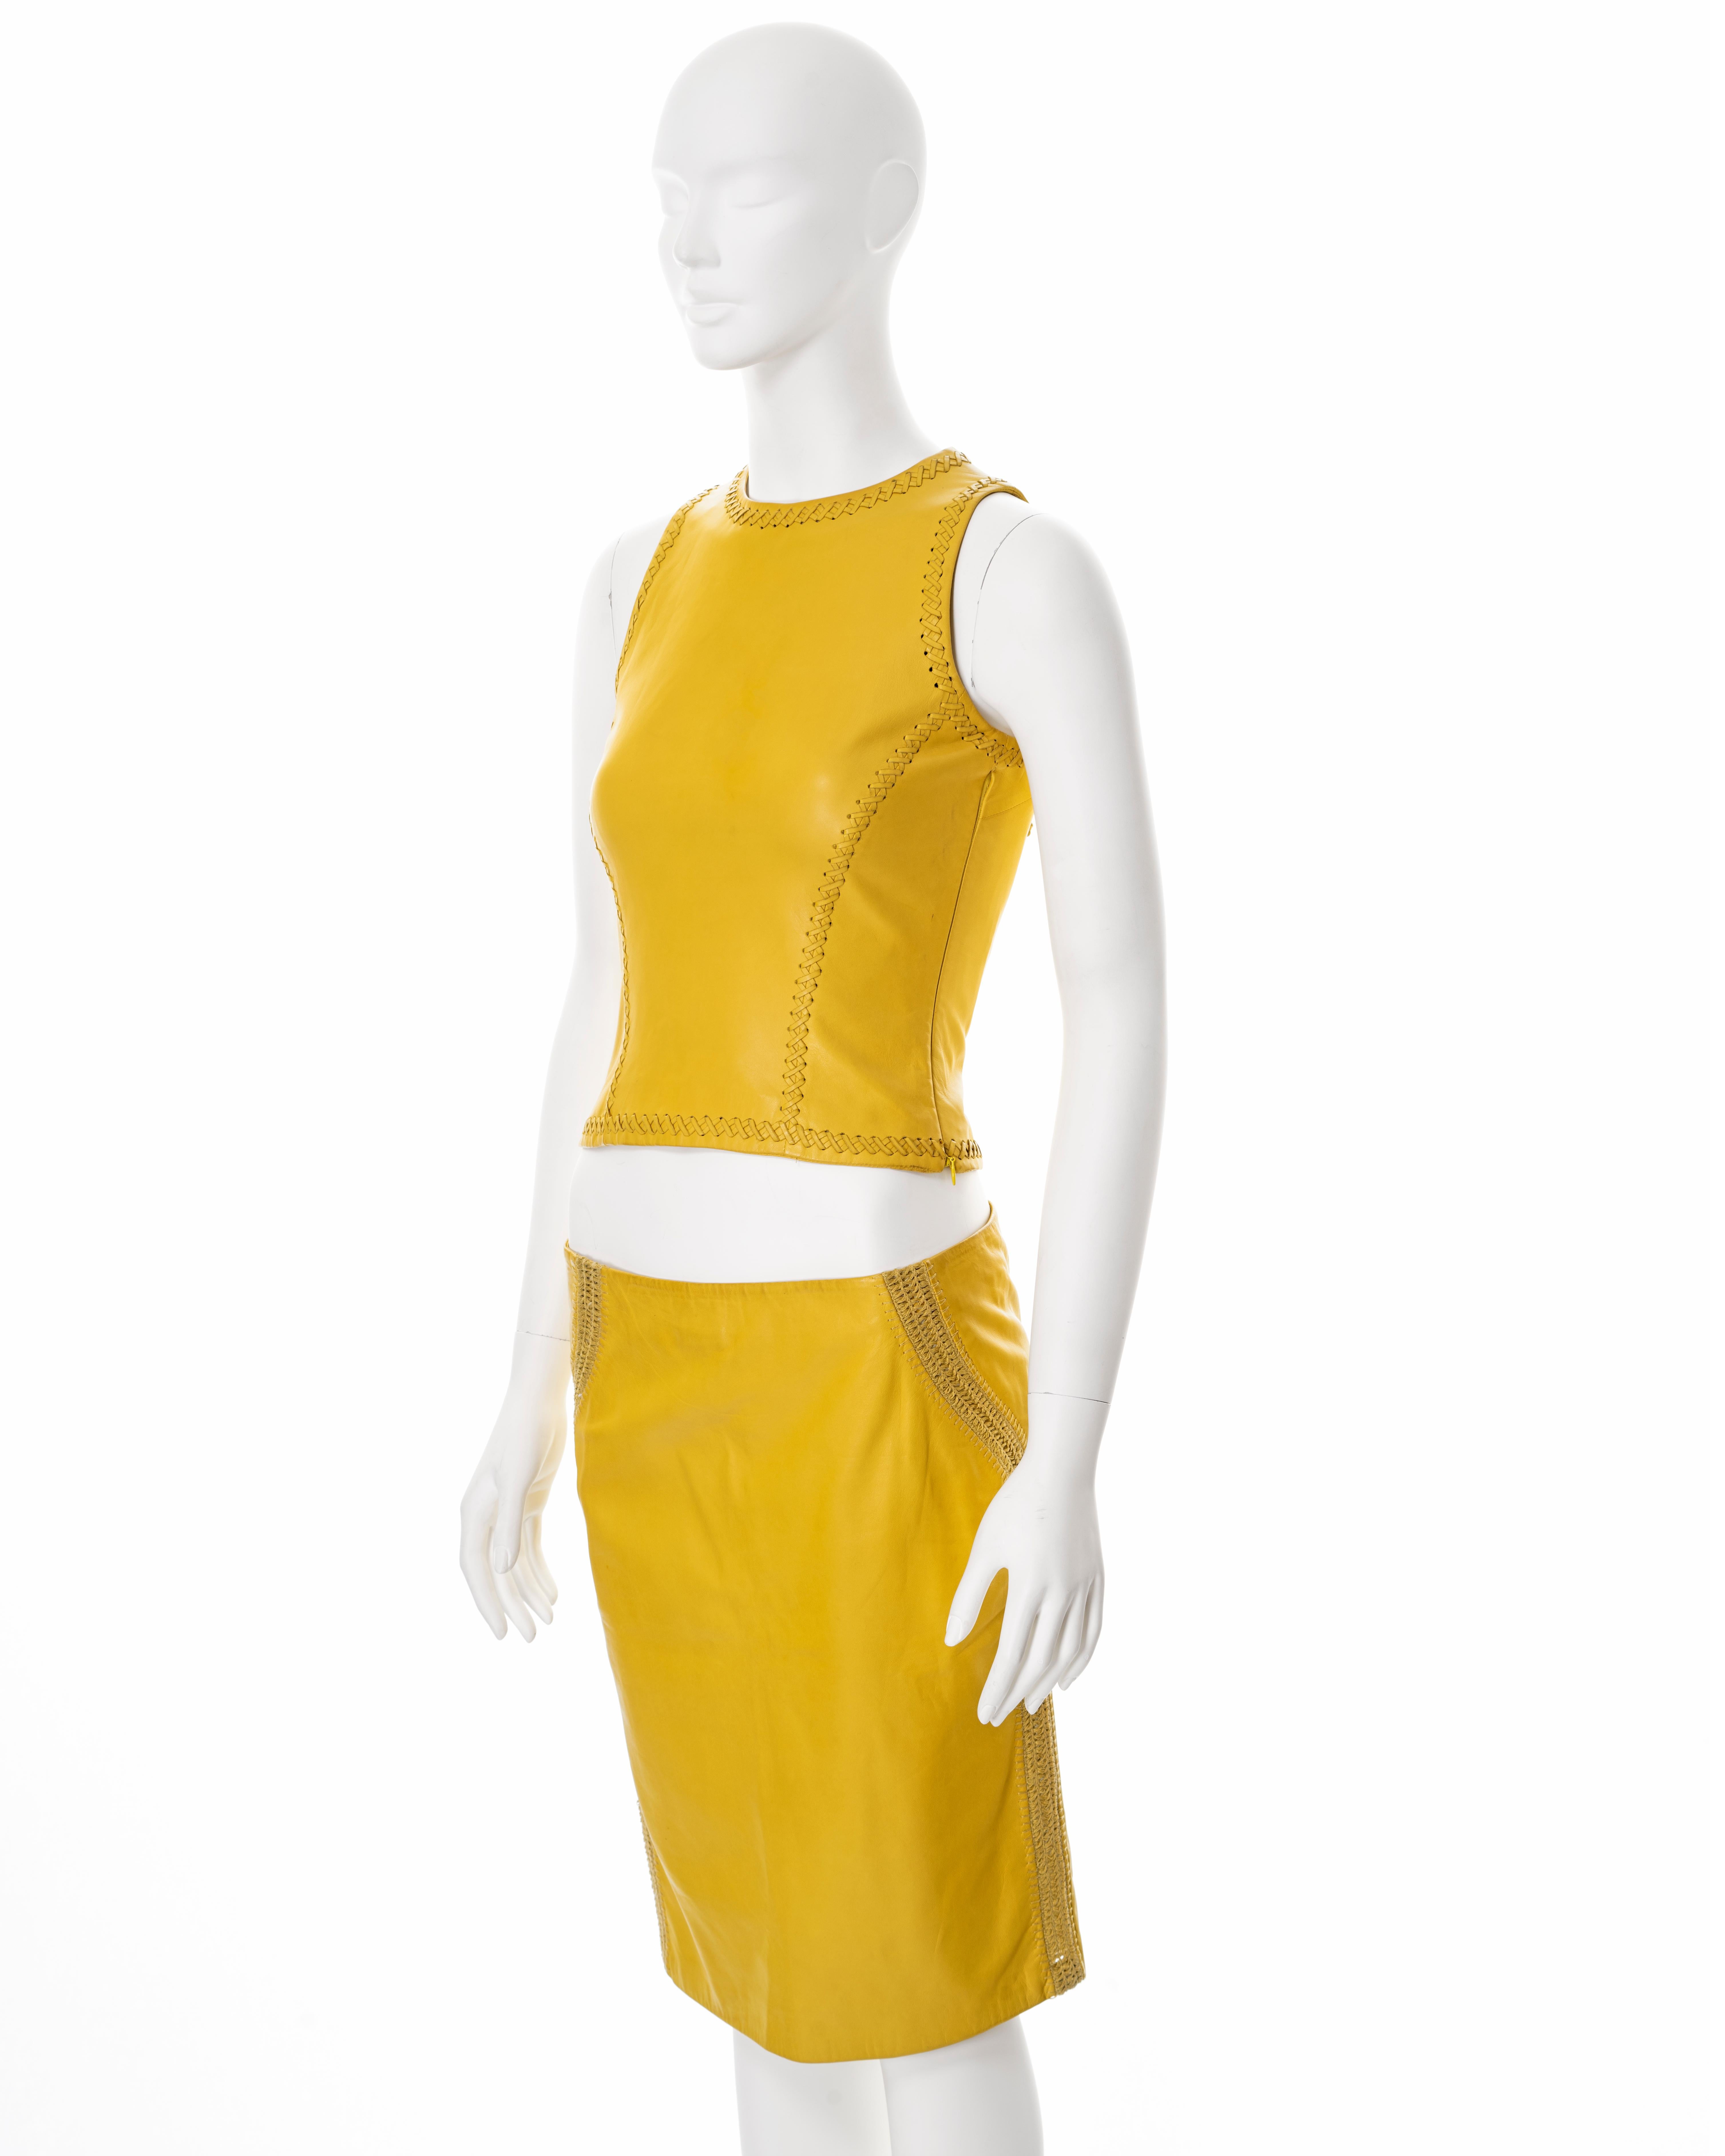 Gianni Versace yellow lambskin leather top and skirt, ss 2003 For Sale 7